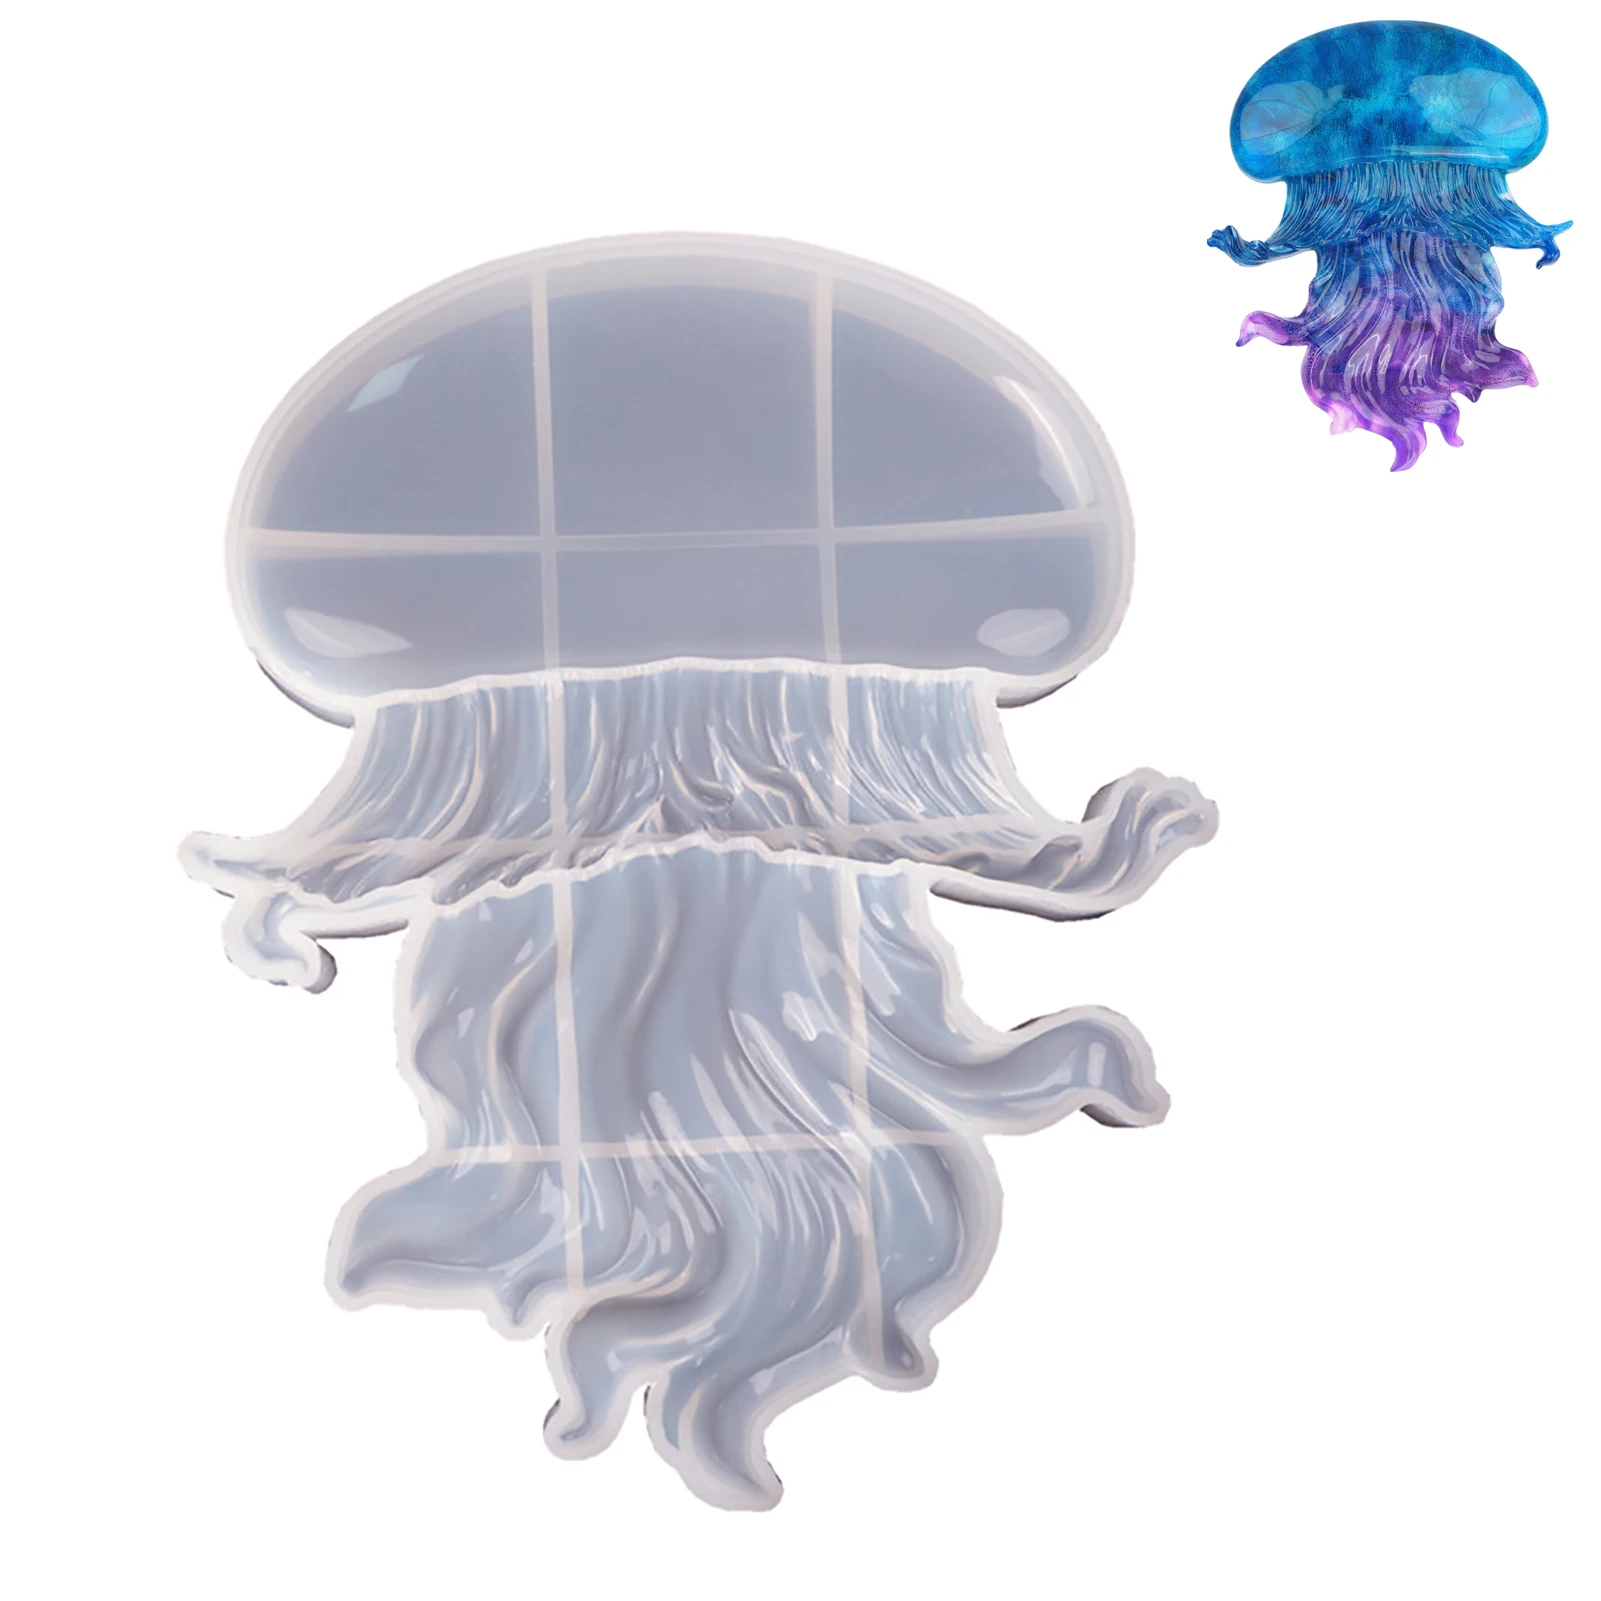 

Jellyfish Silicon Mold Jellyfish Marine Biological Mirror Silica Gel Mold Jellyfish Ornaments Resin Dropping Silicon Mould